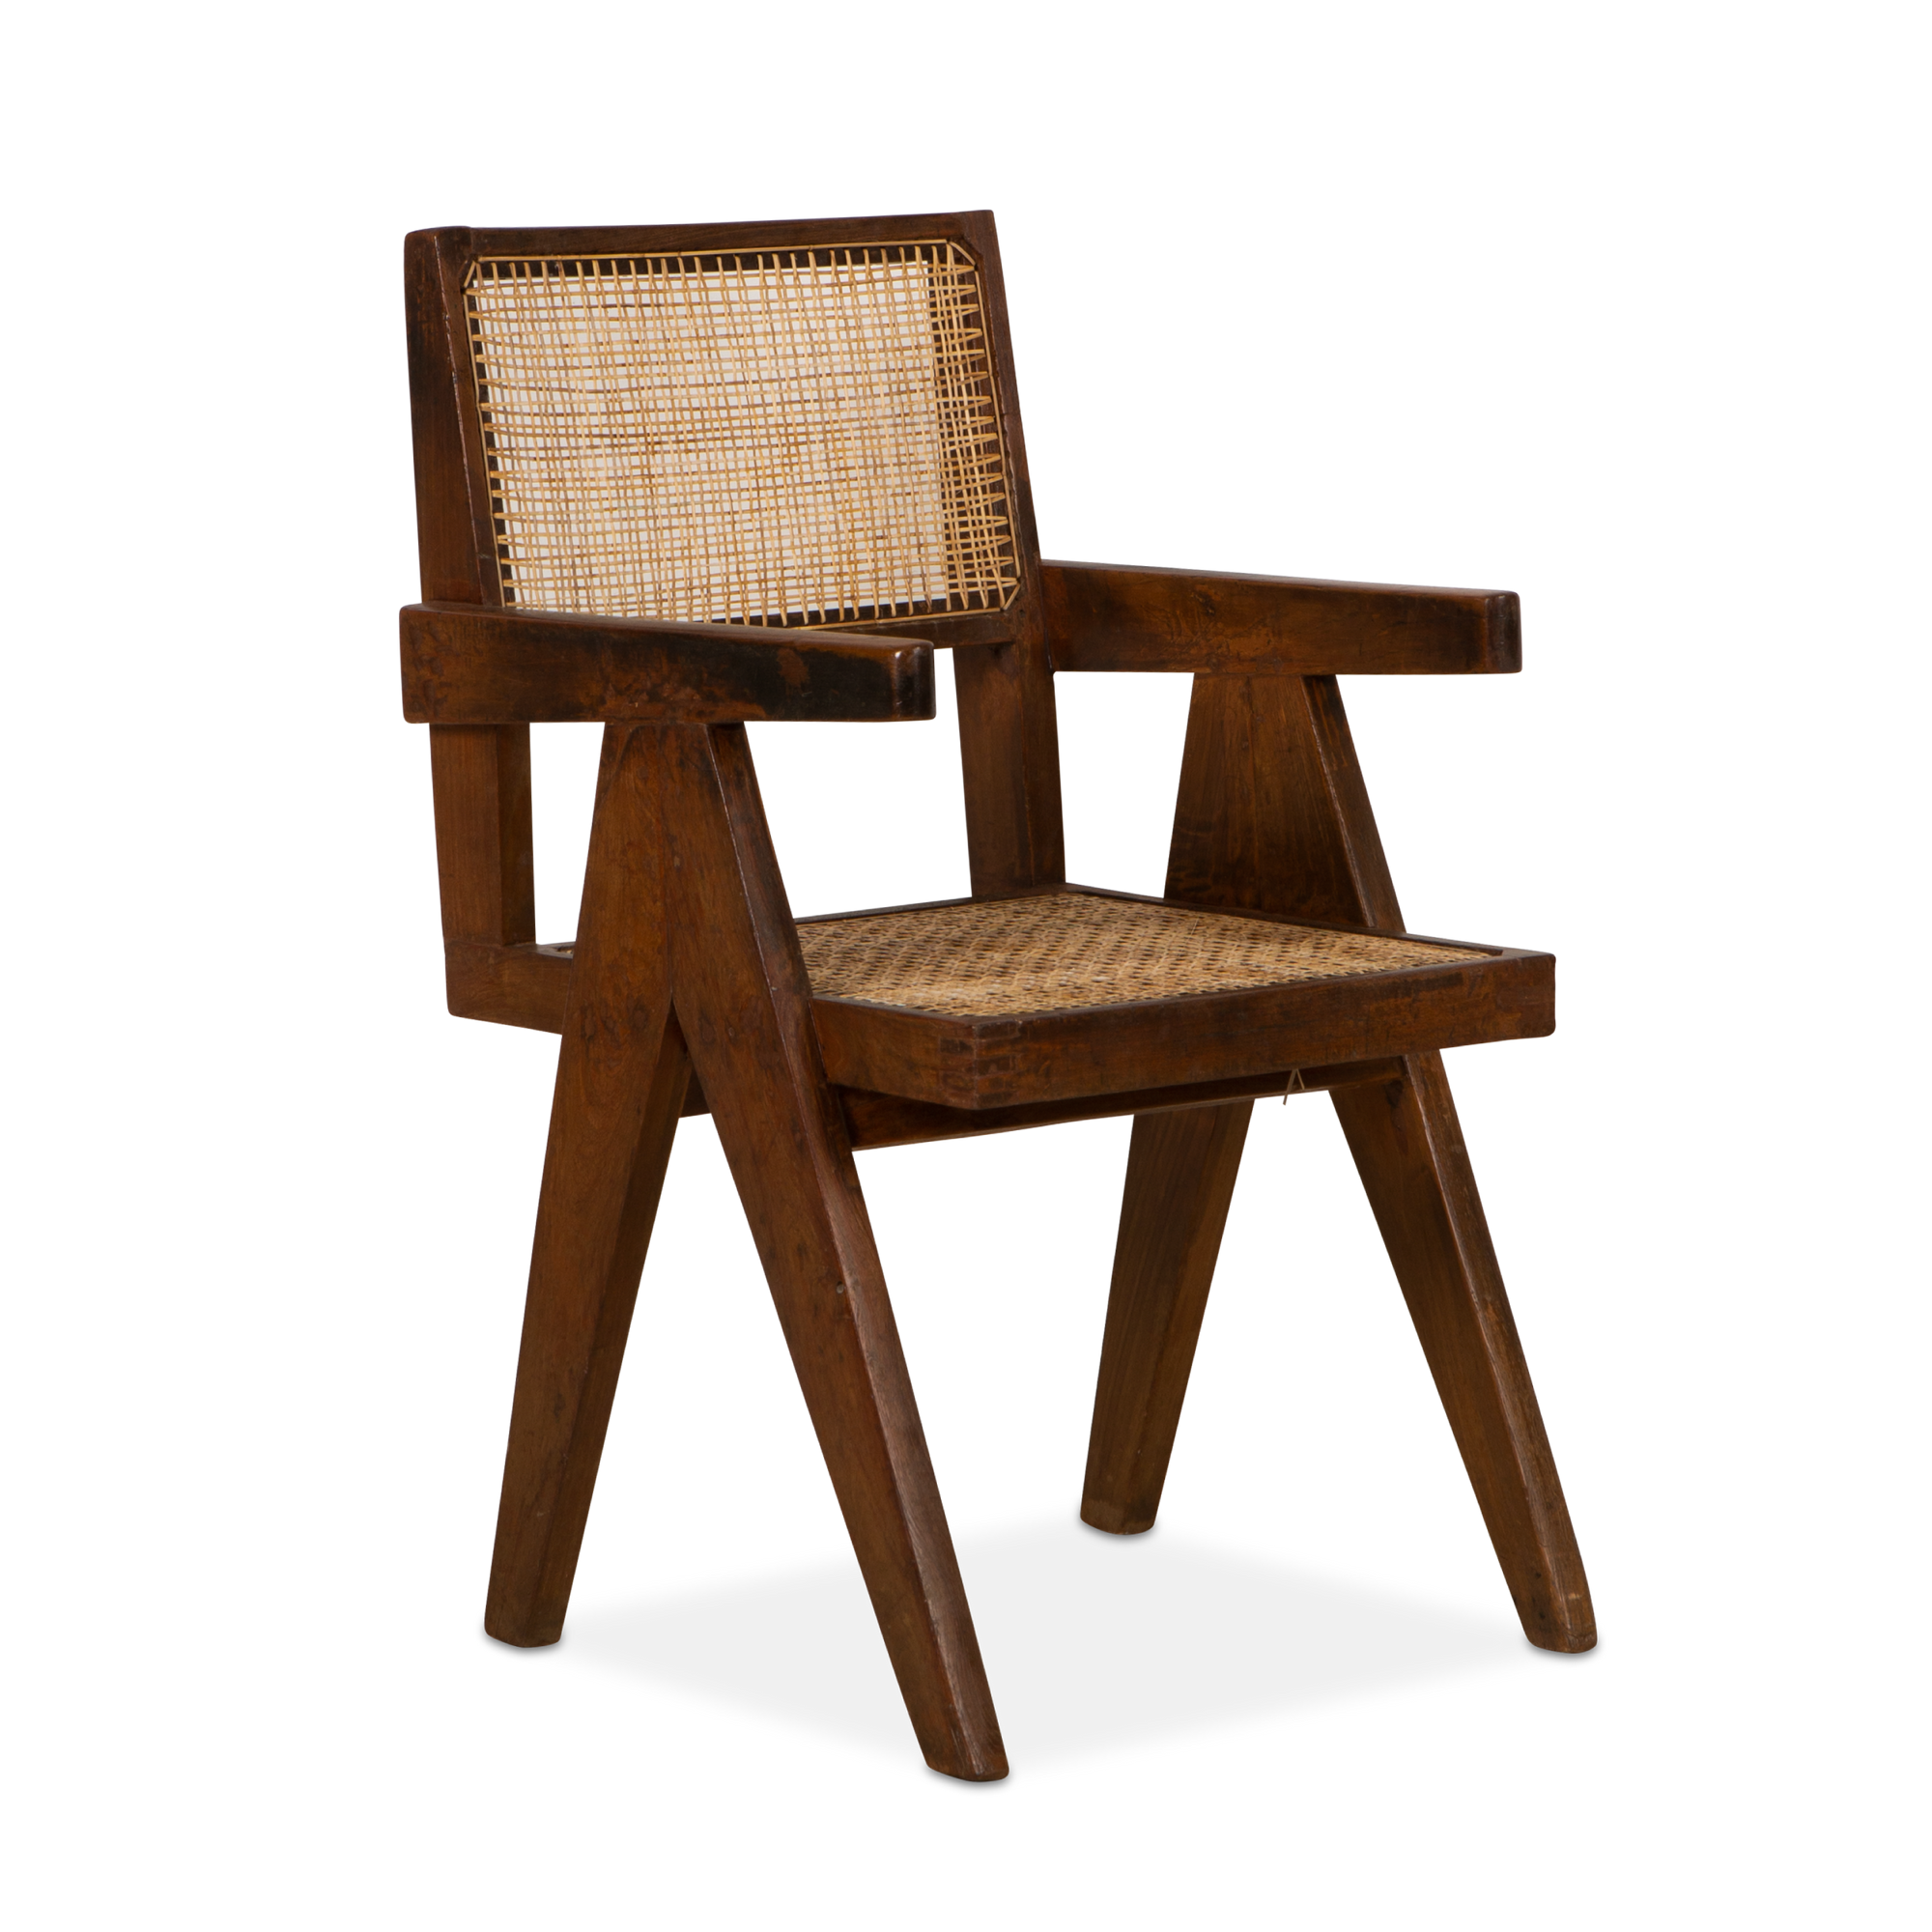 Reflecting the modernist principles of simplicity, the King Chair was designed by Pierre Jeanneret, circa 1950s.